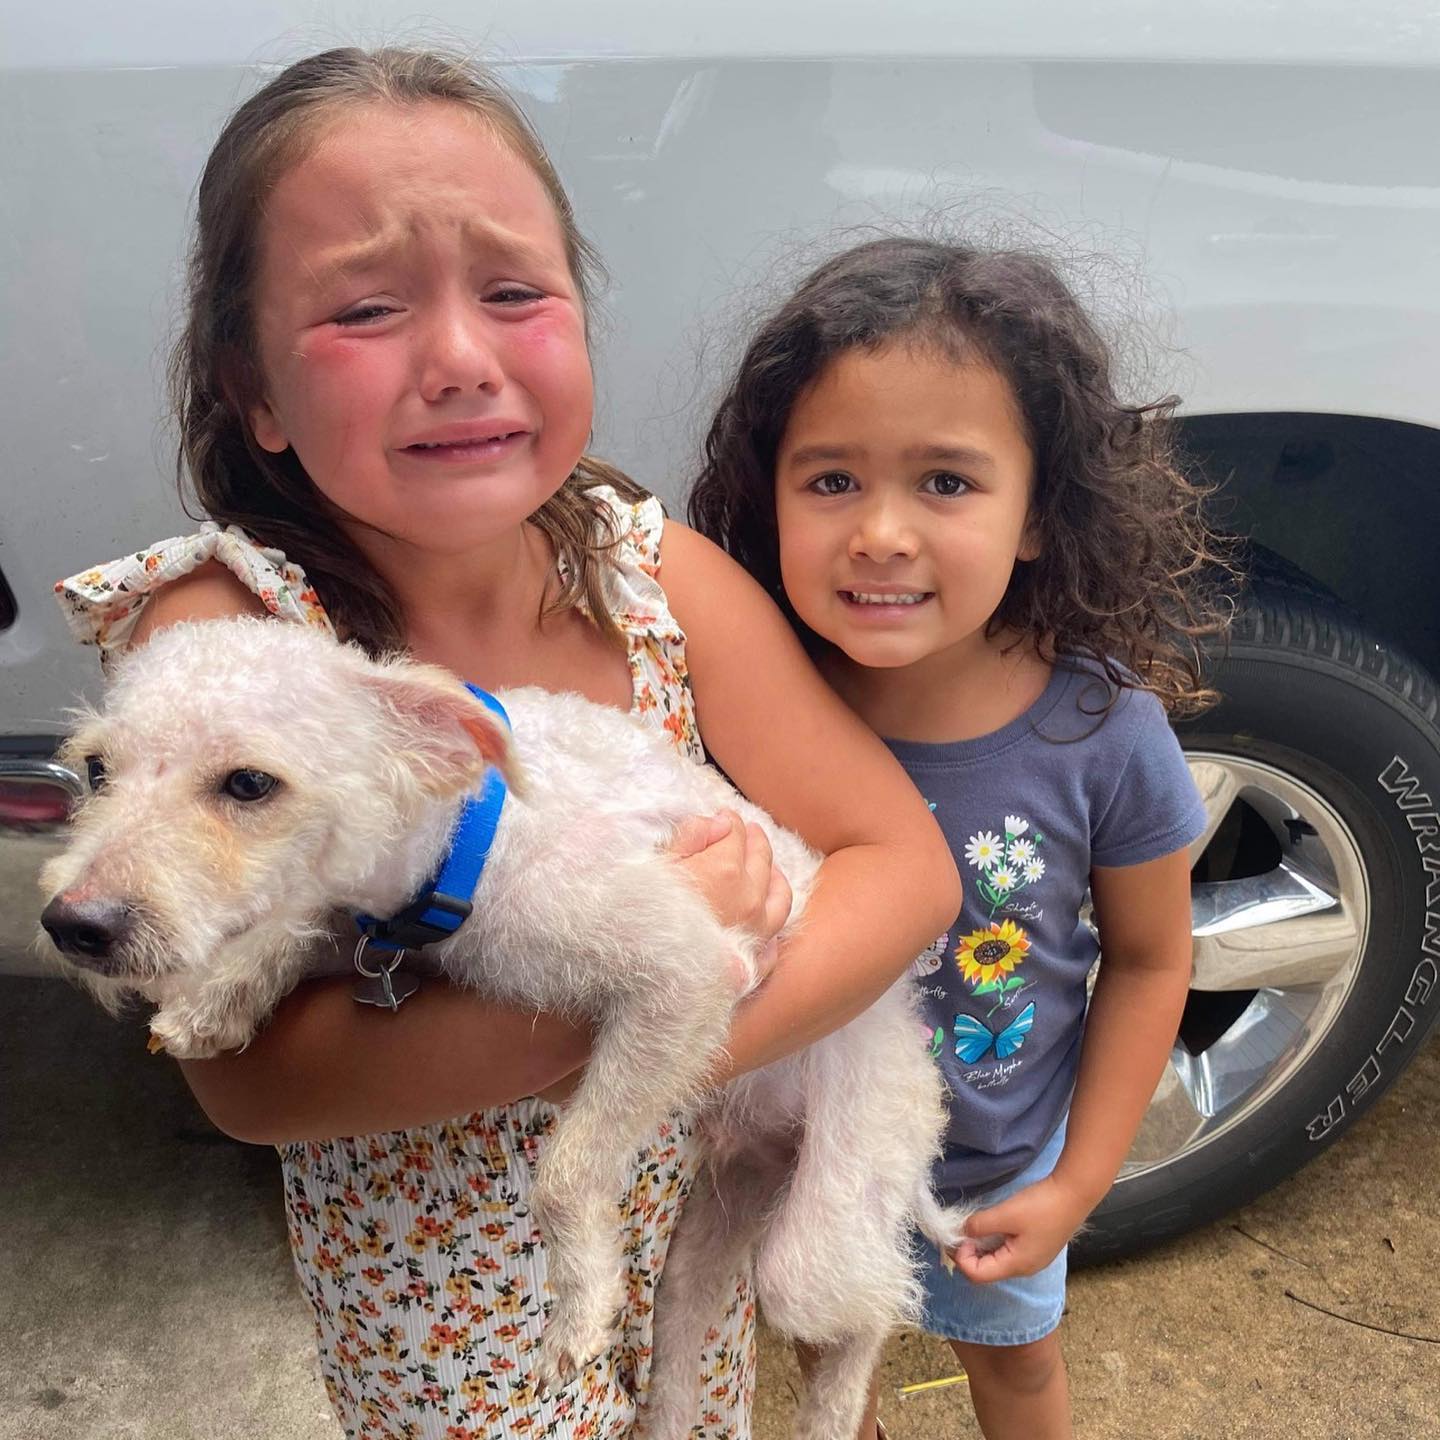 girl crying while holding the dog and standing next to other girl